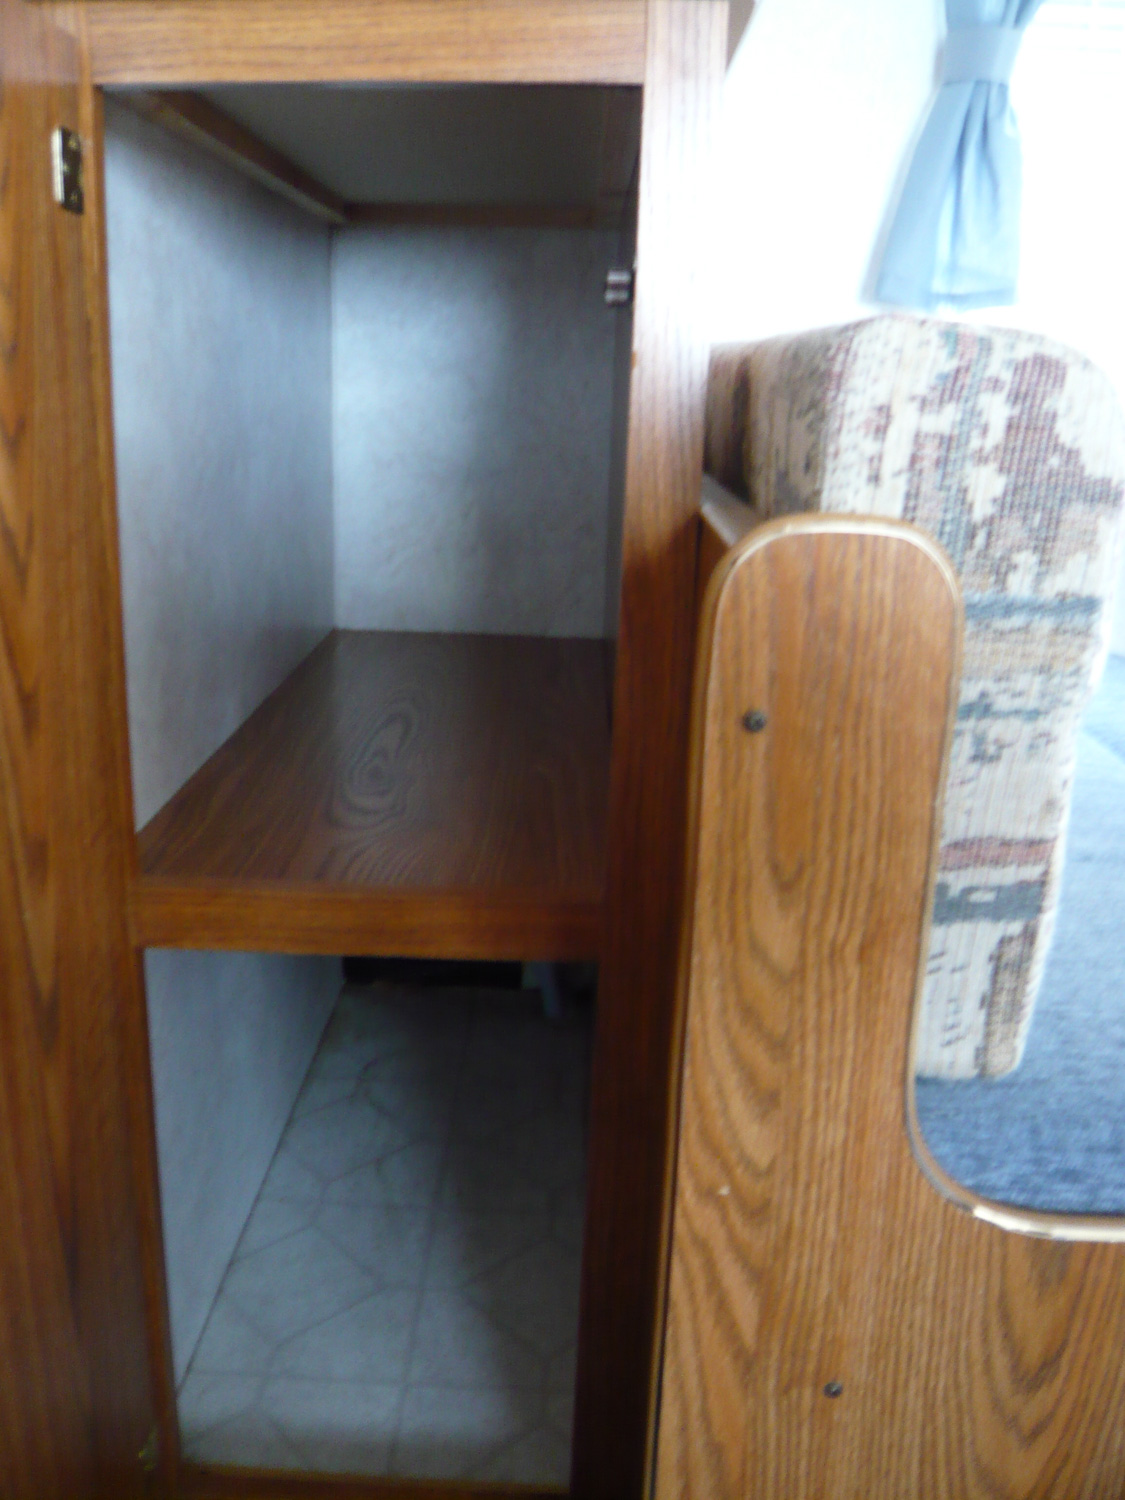  We have a pantry behind one of the dinette seats. 